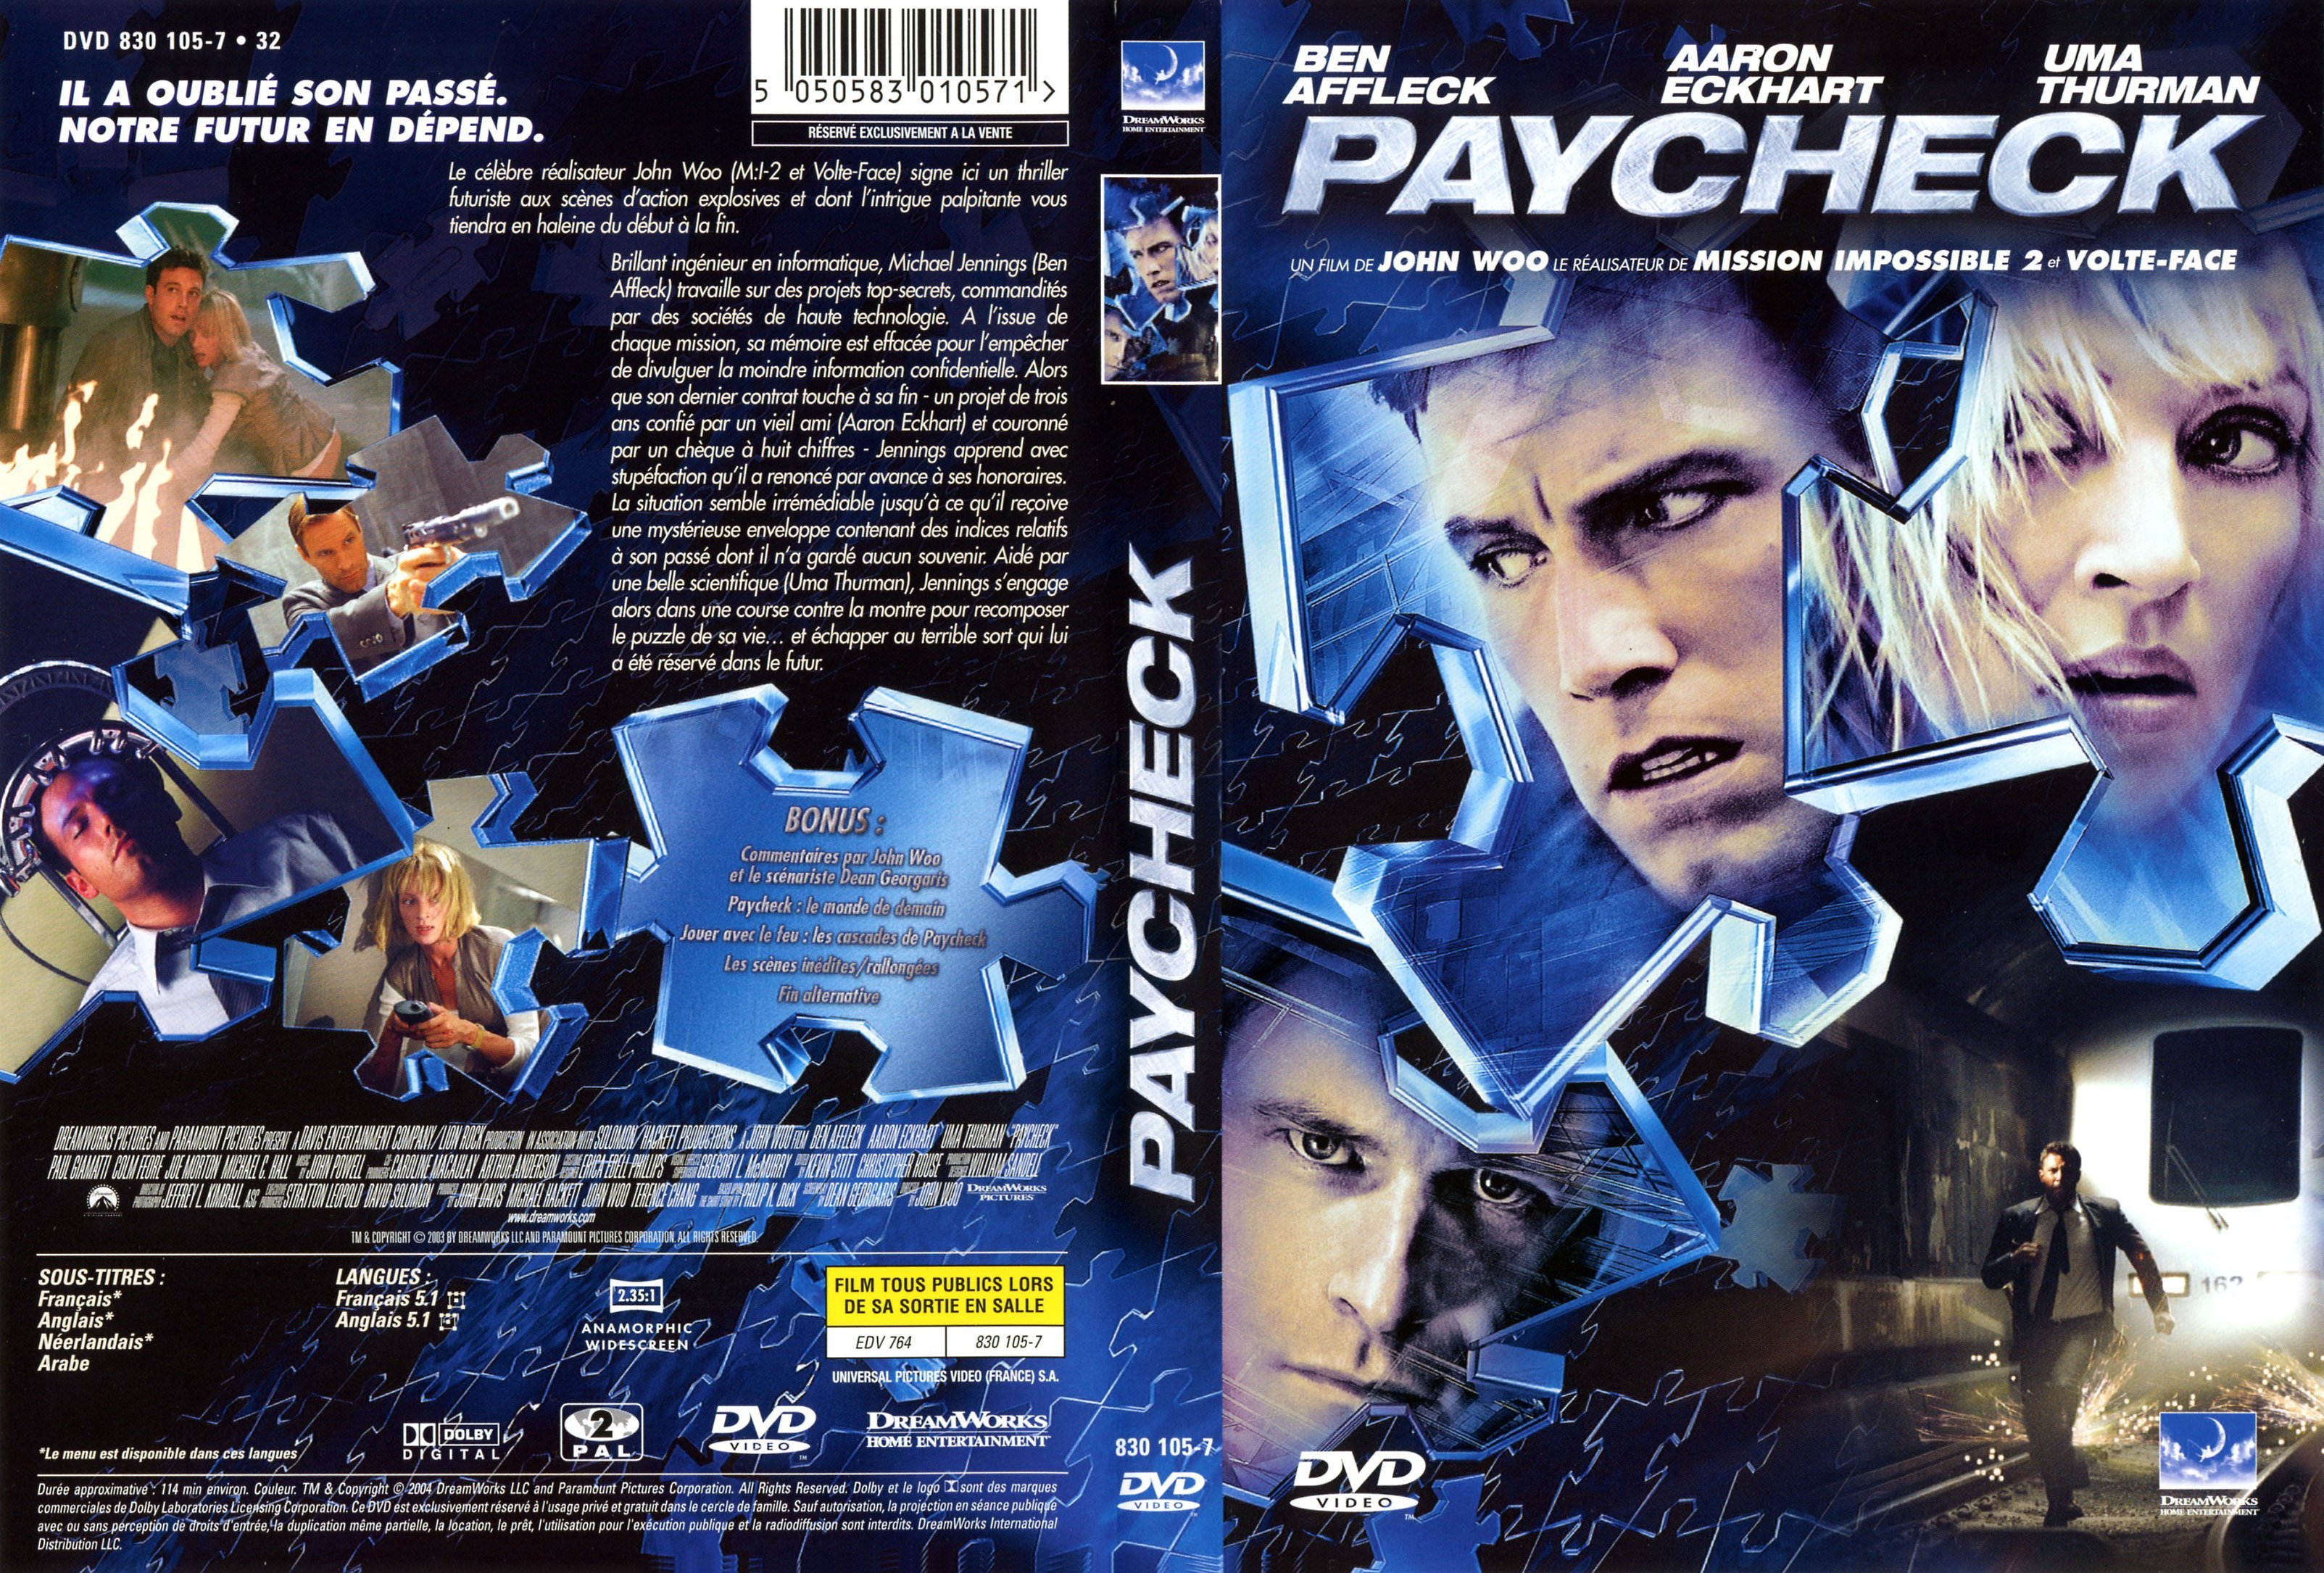 Jaquette DVD Paycheck